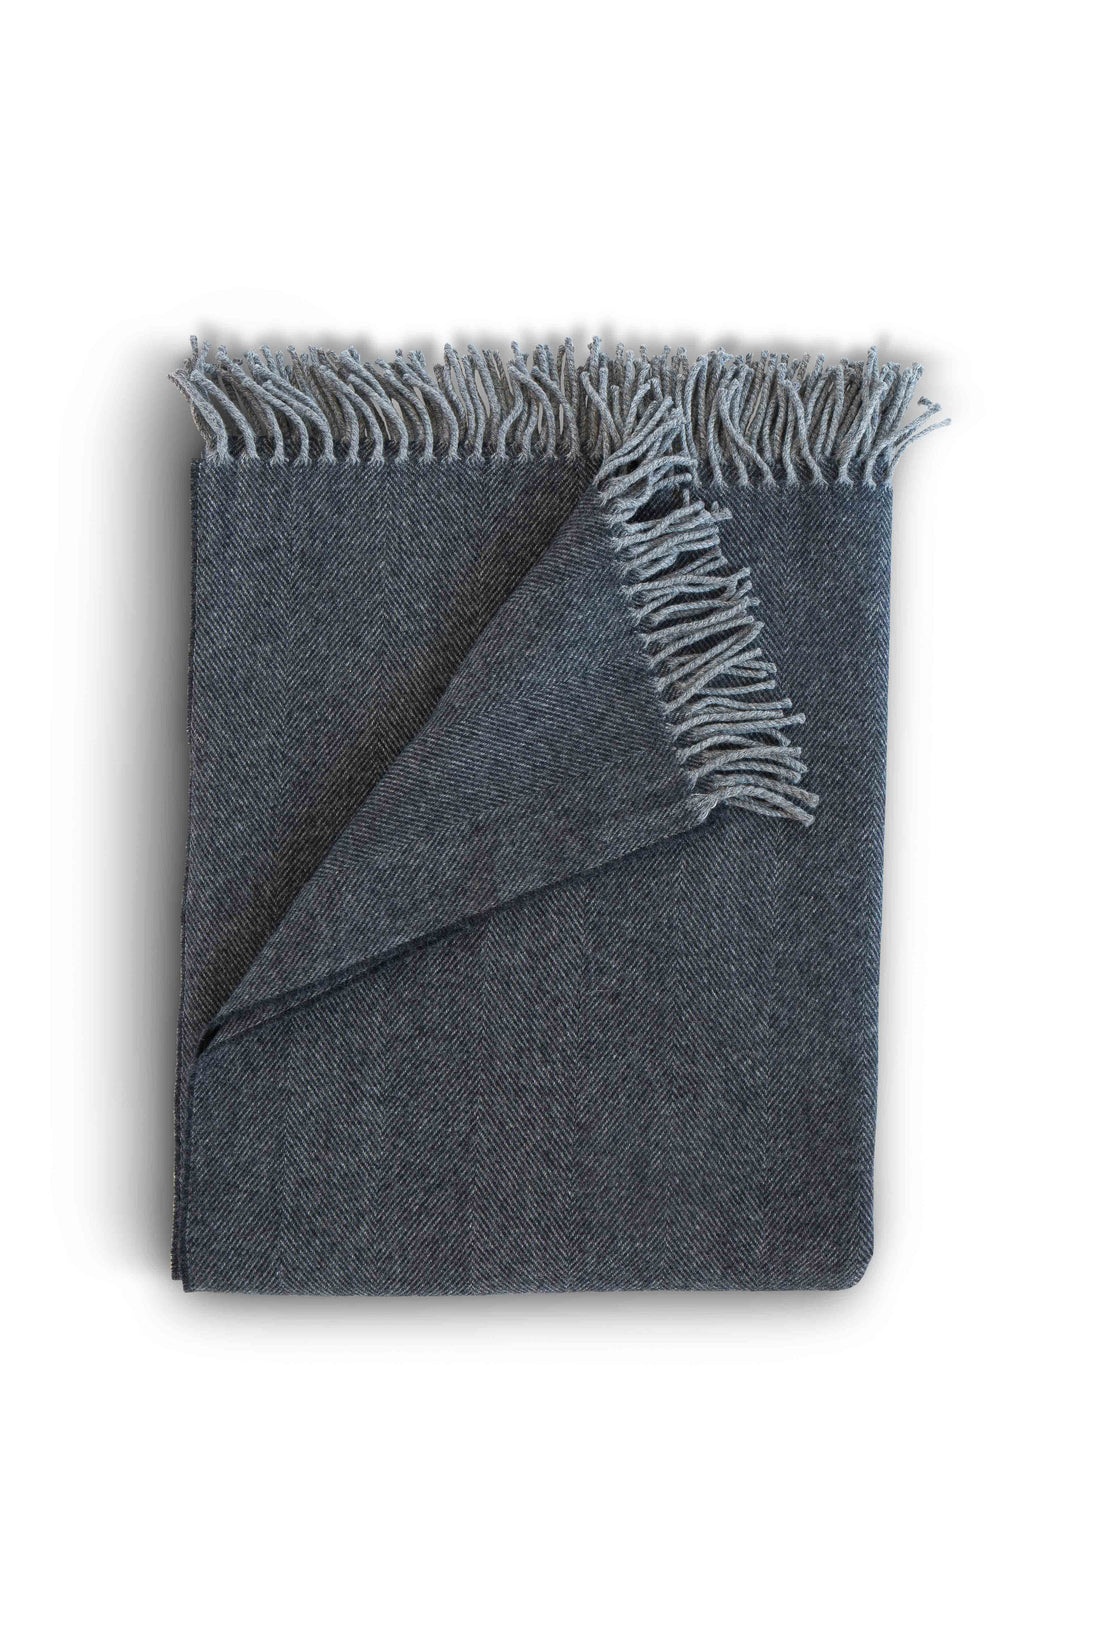 Evangeline Lightweight Herringbone throw with tasseled edge in Midnight, folded against a white background. The lighter weight 'sibling' to our popular Herringbone Throws.  Oh-so-soft. And perfect for summer nights.  